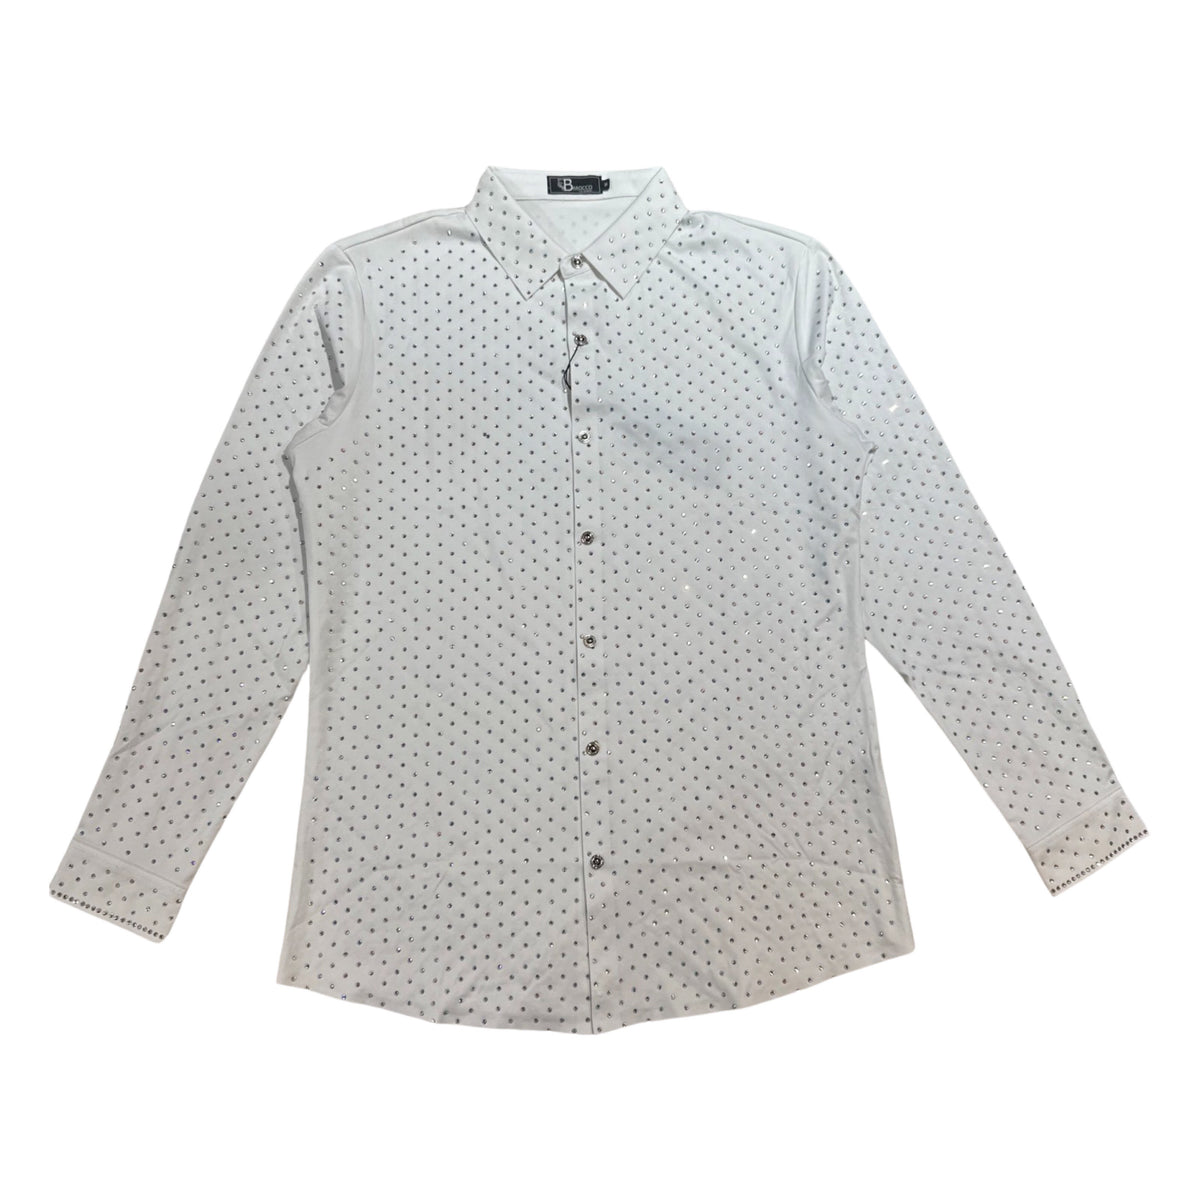 Barocco White Fully Loaded Iridescent Crystal Button Up Shirt